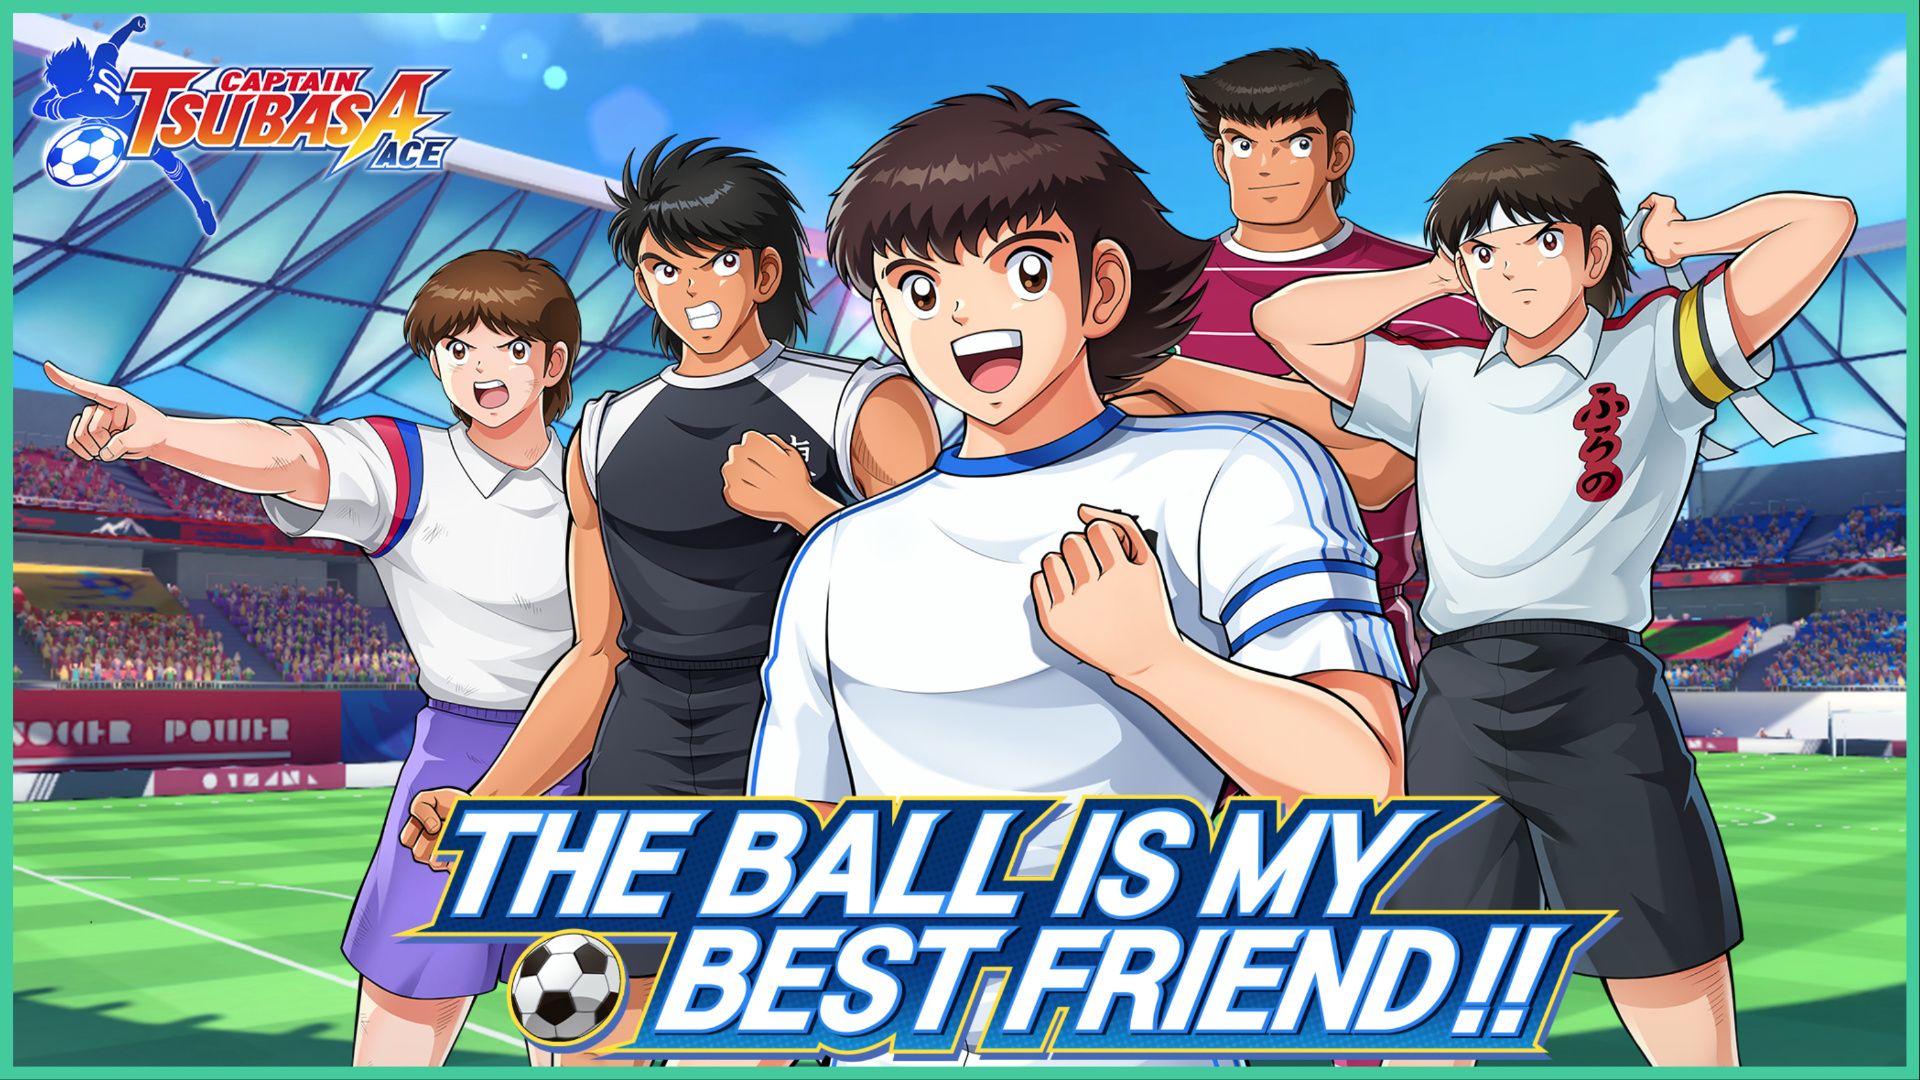 feature image for our captain tsubasa ace tier list, the image features promo art for the gsme of 5 characters from the tsubasa franchise as they stand on a football pitch with stands full of fans in the background, the game's logo is at the top right with a silhouette of tsubasa kicking a football and there is text at the bottom of the image that reads "the ball is my best friend" with a football next to it